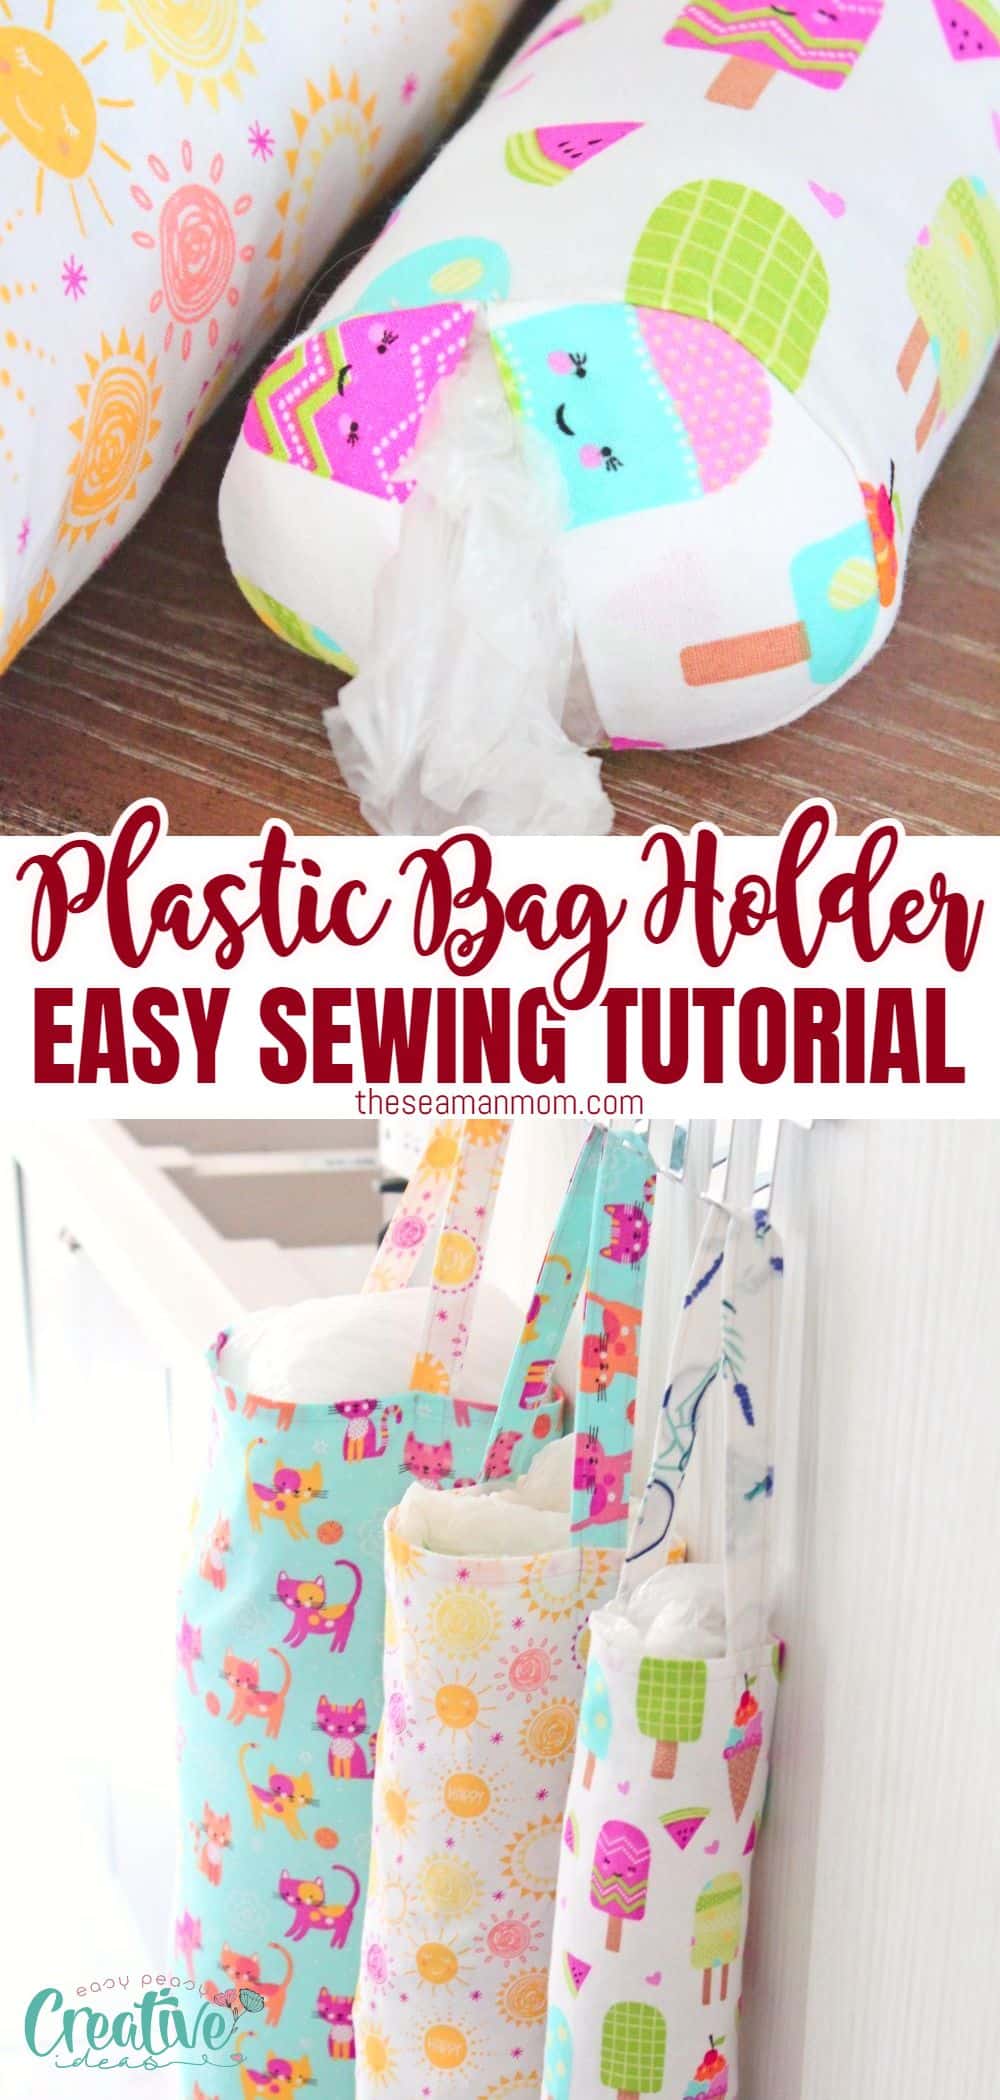 Say goodbye to that pile of plastic bags you’ve been keeping in the back of your pantry and say hello to a stylish and organized plastic bag holder for all of your shopping and grocery bags! Creating your very own plastic bag holder is easier than ever with this easy peasy sewing tutorial. Not only does it provide convenience in terms of storage, but it is also environmentally friendly. Get ready to enjoy the convenience of a personalized plastic bags holder today! via @petroneagu